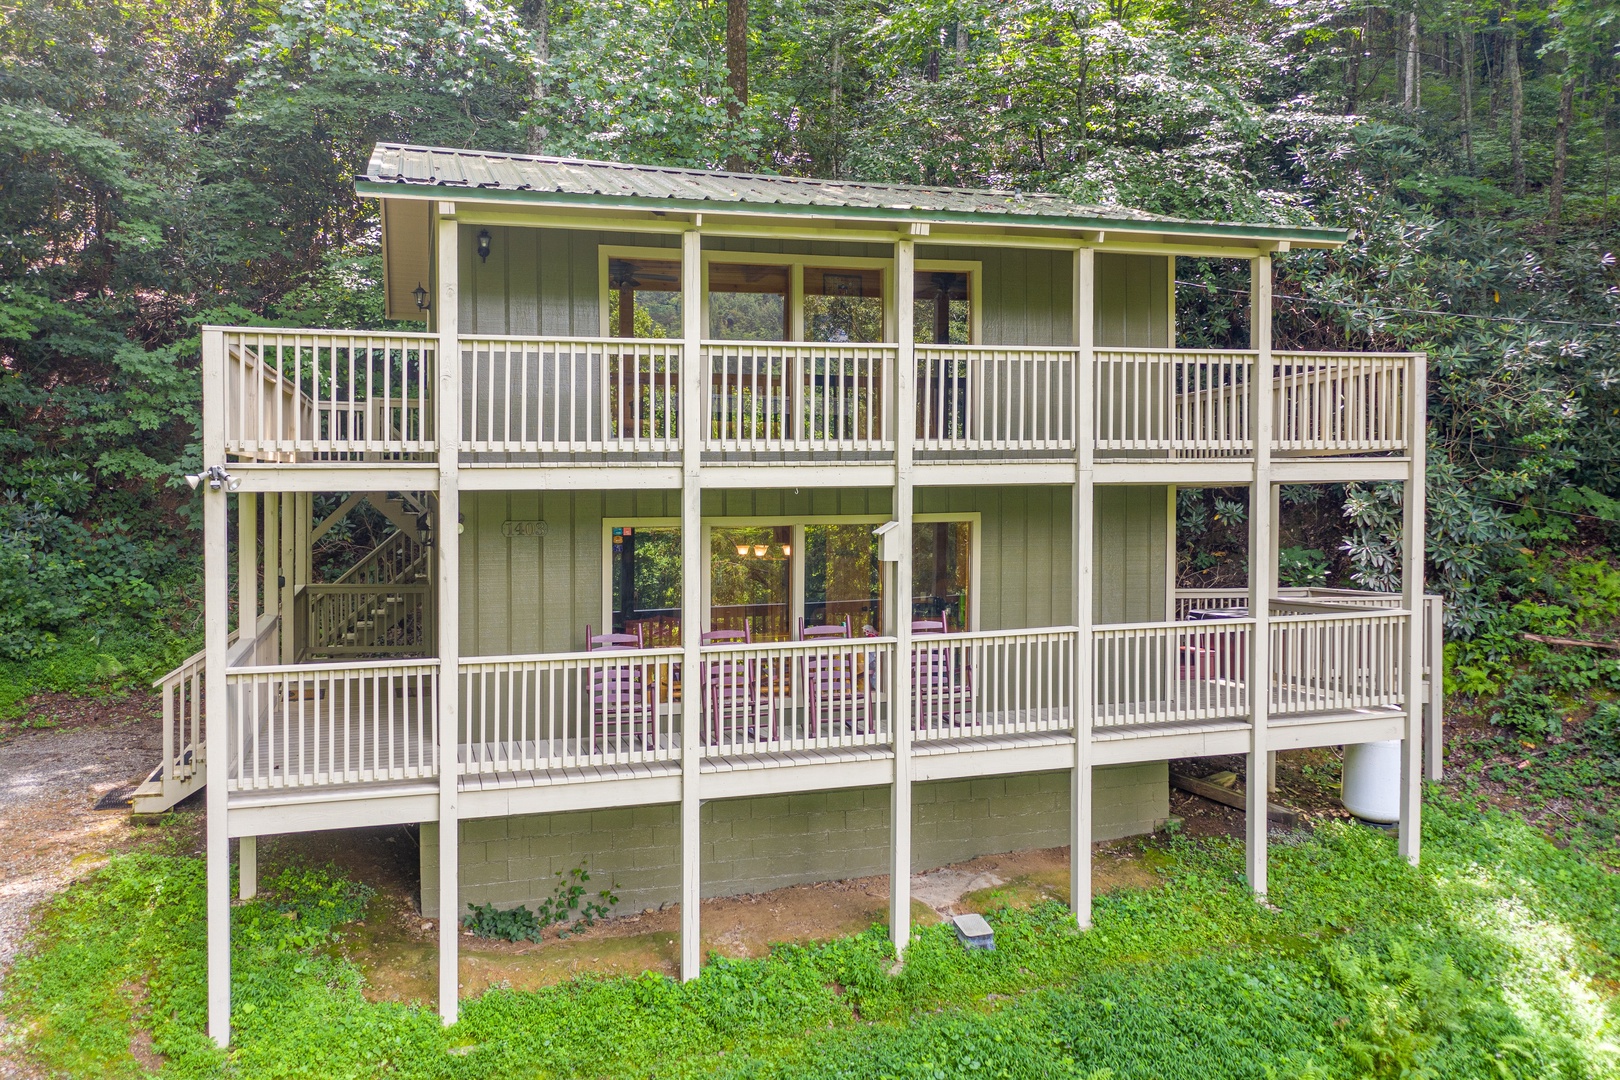 License to Chill, a 3 bedroom cabin rental located in Gatlinburg